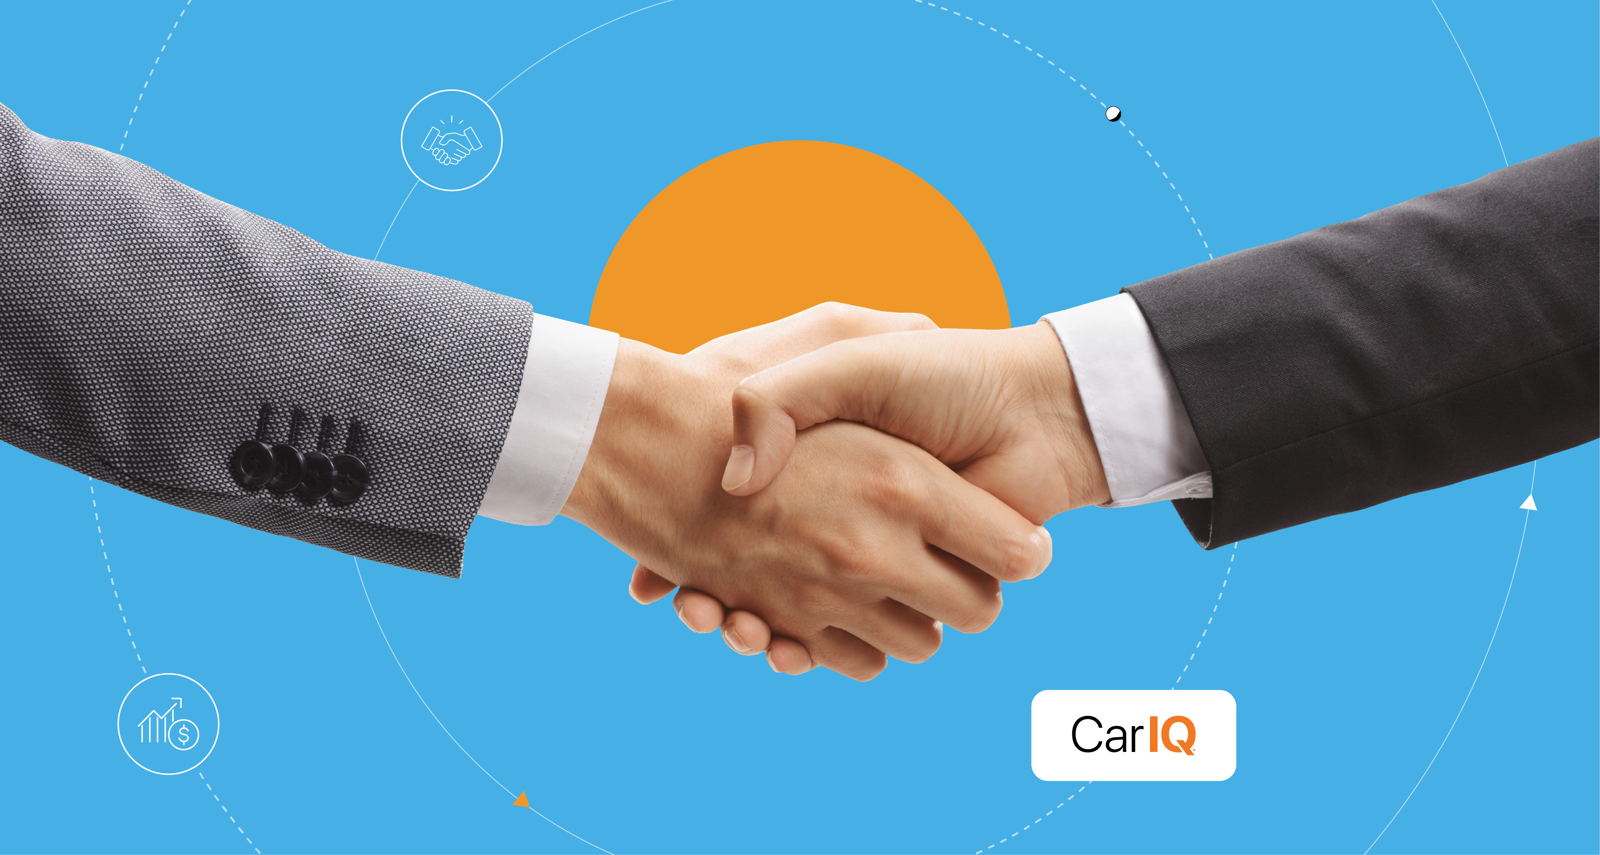 i2c Partners With Car IQ To Deliver a Superior Cost Management Tool for Fleet Operators